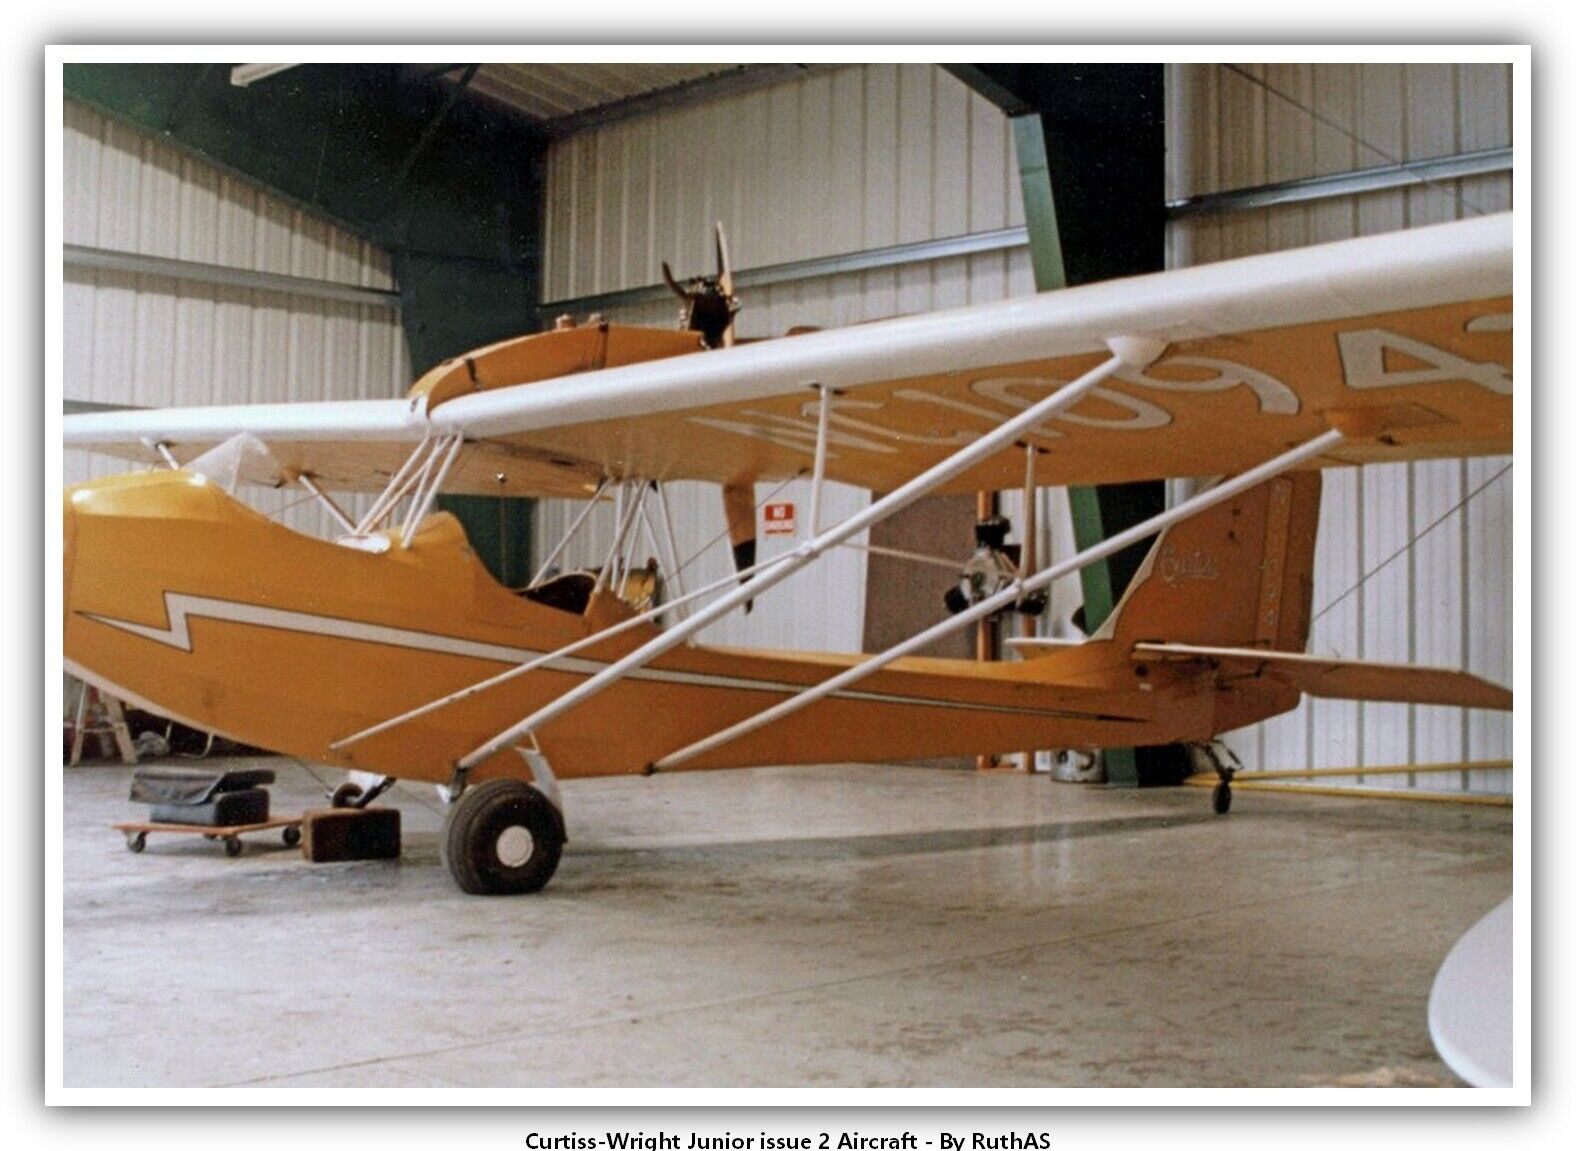 Curtiss-Wright Junior issue 2 Aircraft